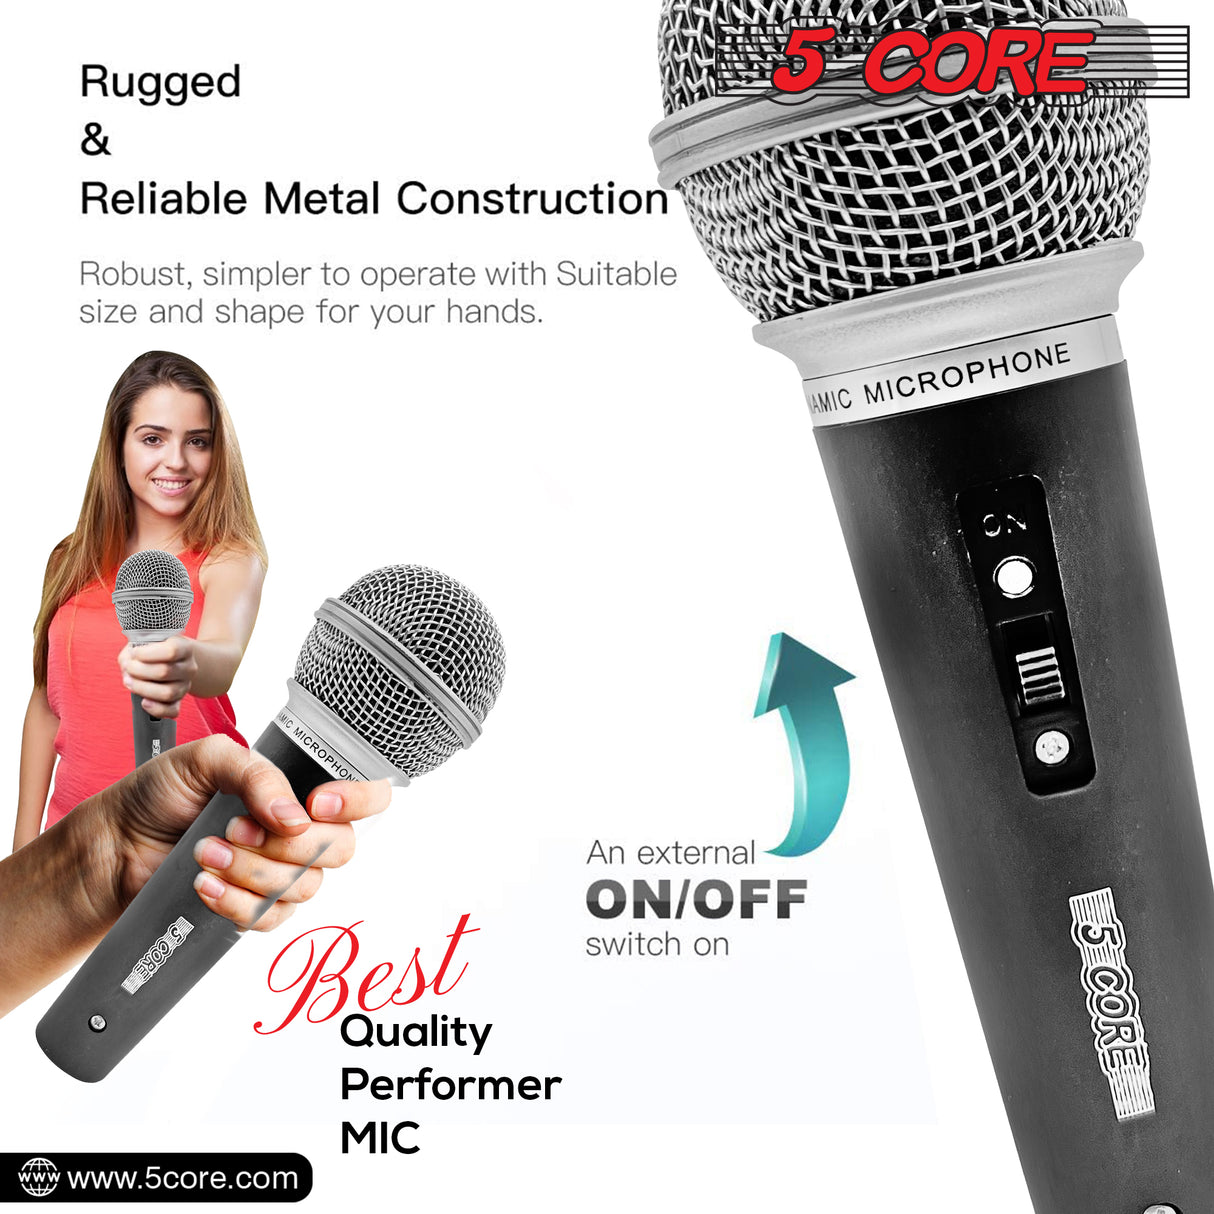 5 CORE Premium Vocal Dynamic Cardioid Handheld Microphone Unidirectional Mic with 12ft Detachable XLR Cable to ¼ inch Audio Jack, Mic Clip, and On/Off Switch for Karaoke Singing PM 58